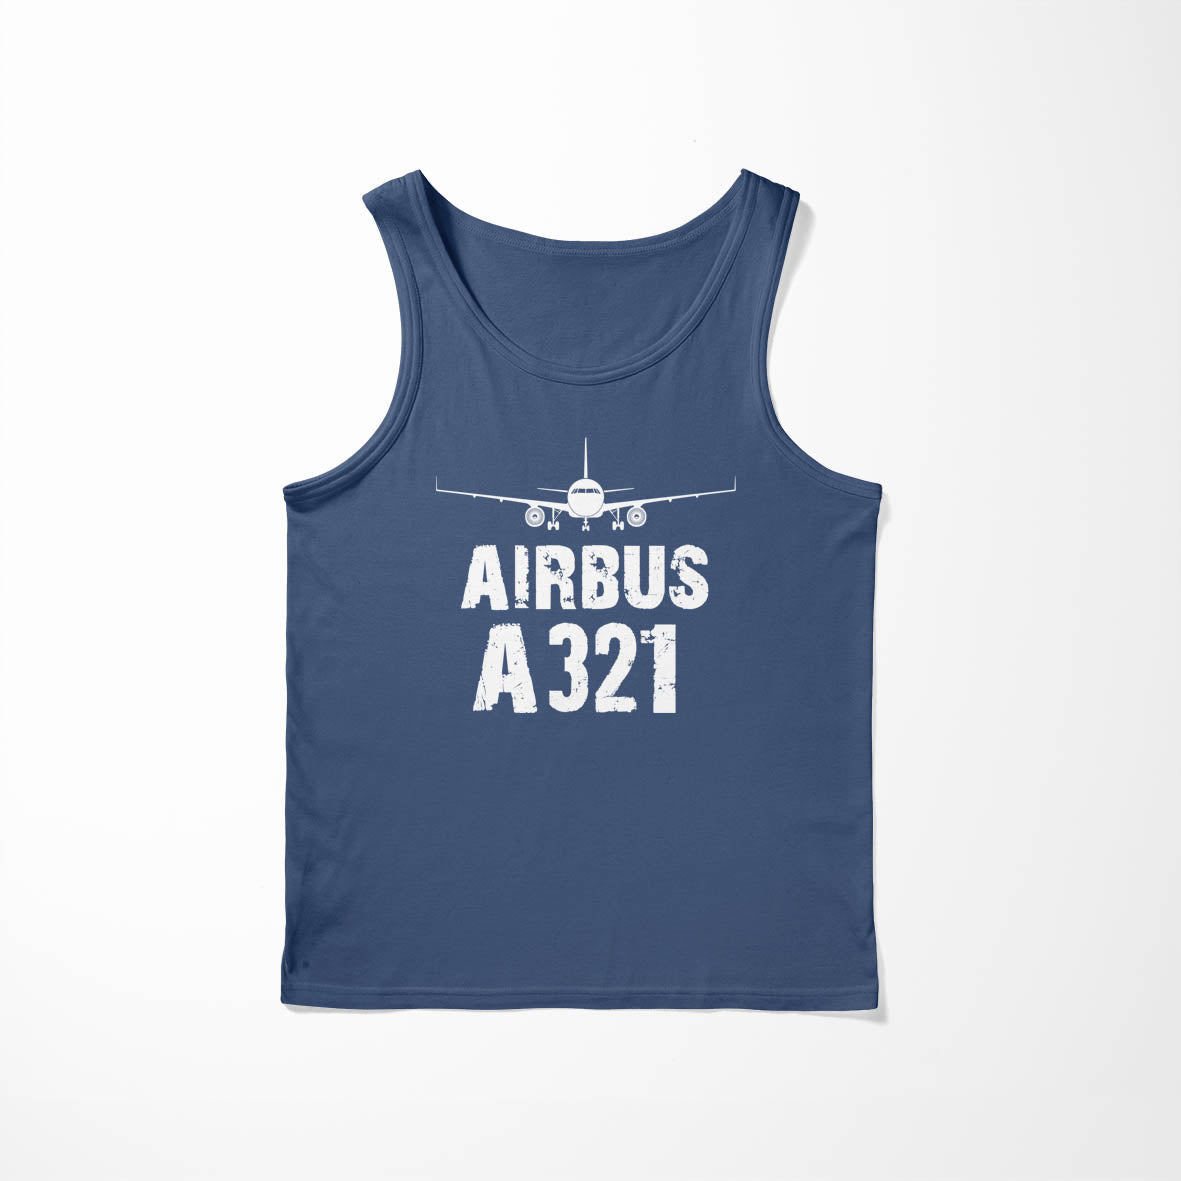 Airbus A321 & Plane Designed Tank Tops